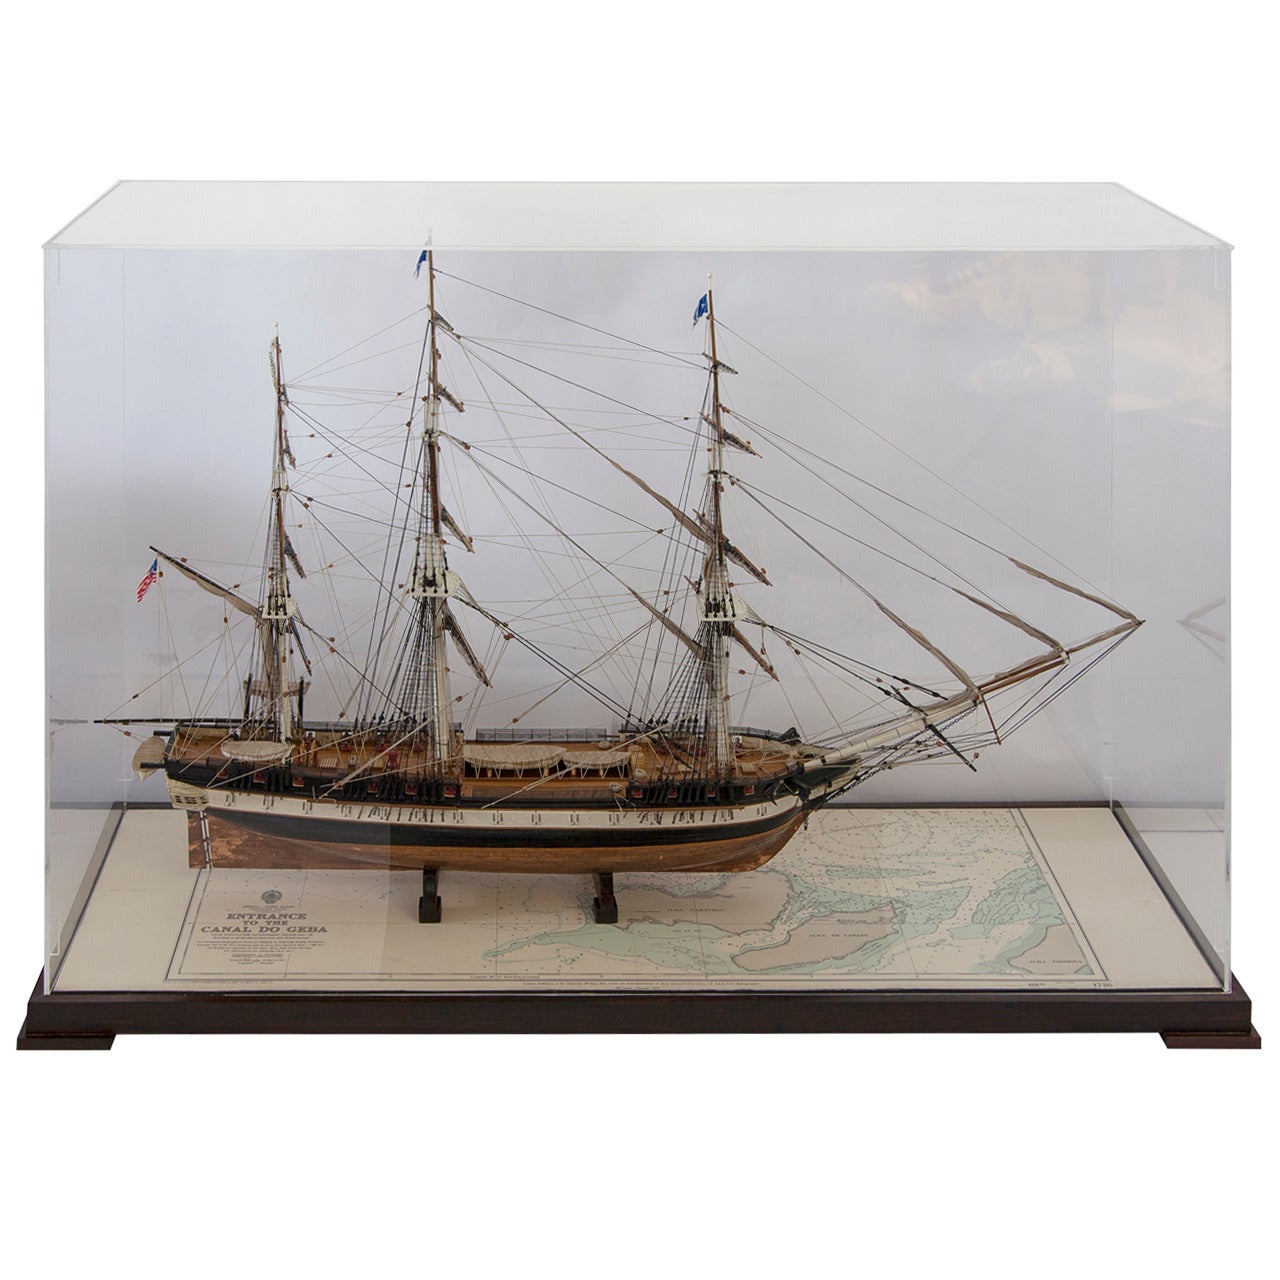 Model of a boat “Competition” from U.S Navy. For Sale